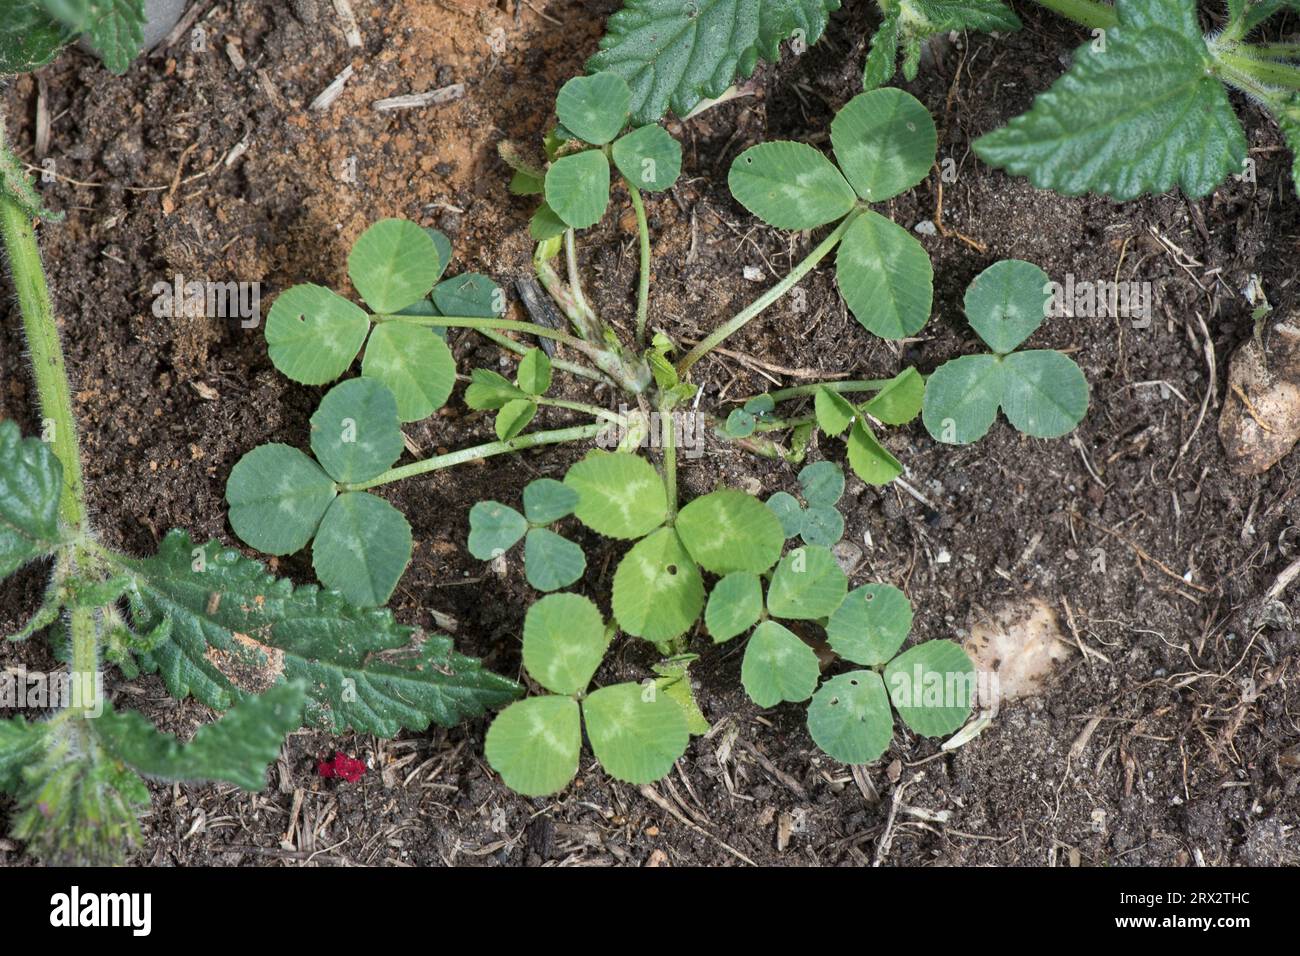 White clover (Trifolium repens) rosette of leaves on a young perennial herbaceous weed plant in a garden flower bed, Berkshire, June Stock Photo